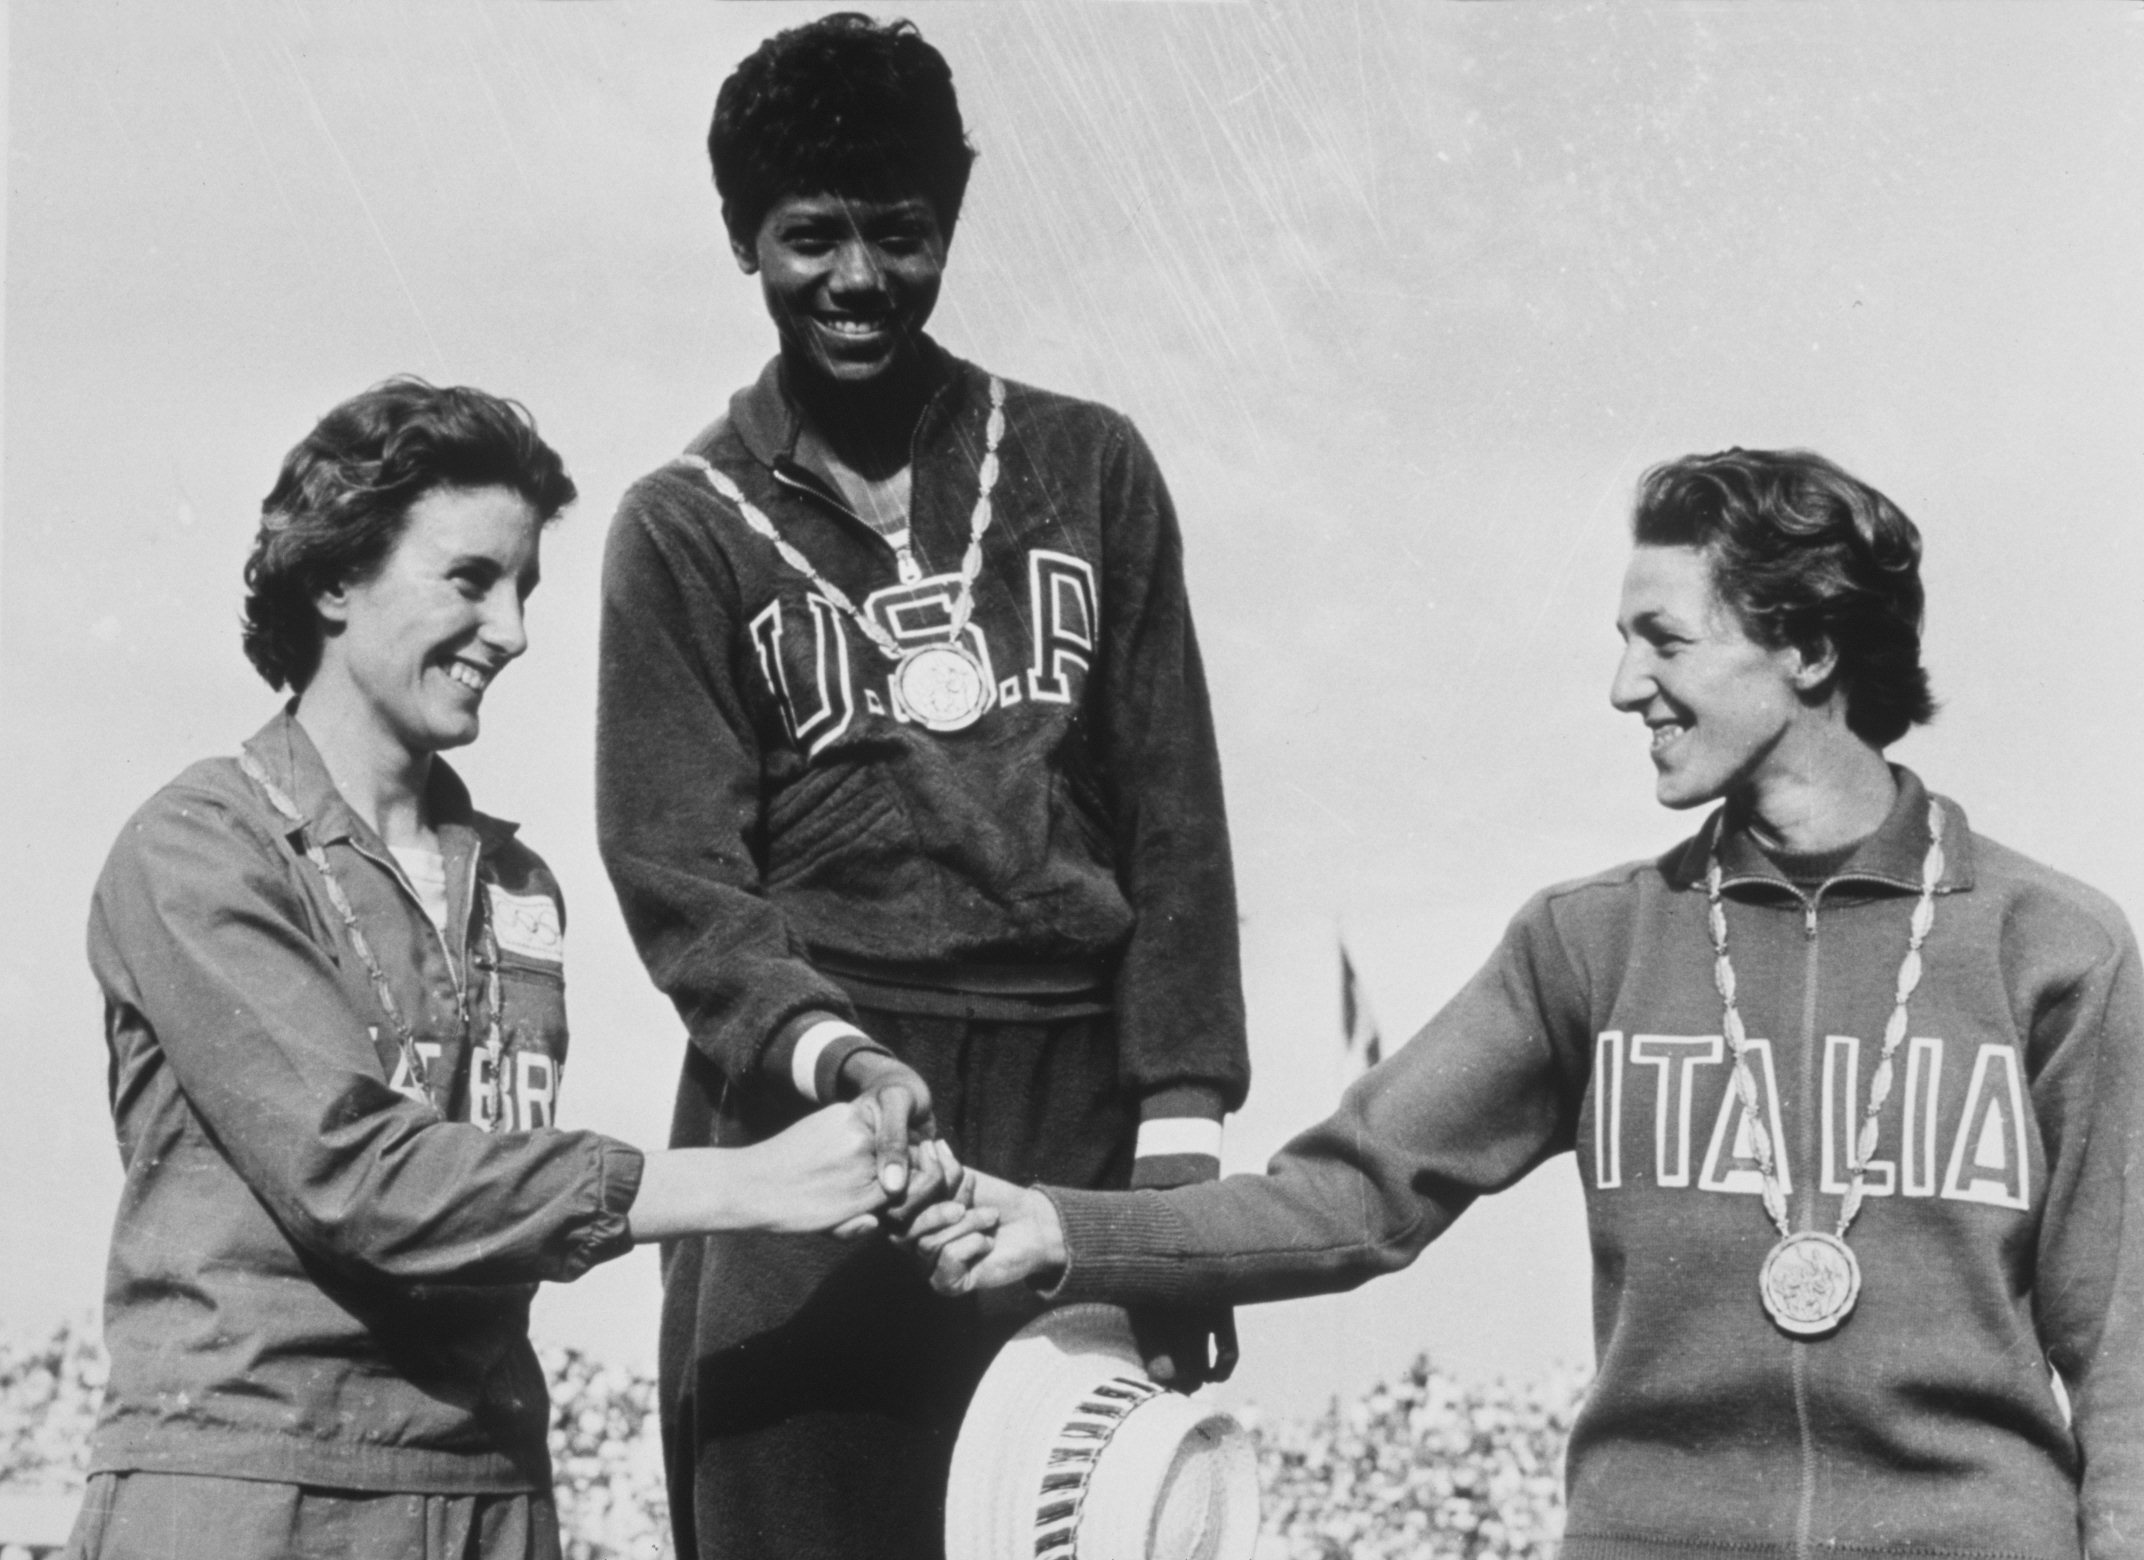 Olympic memories of Wilma Rudolph | Doctor said she could not walk, so she ran